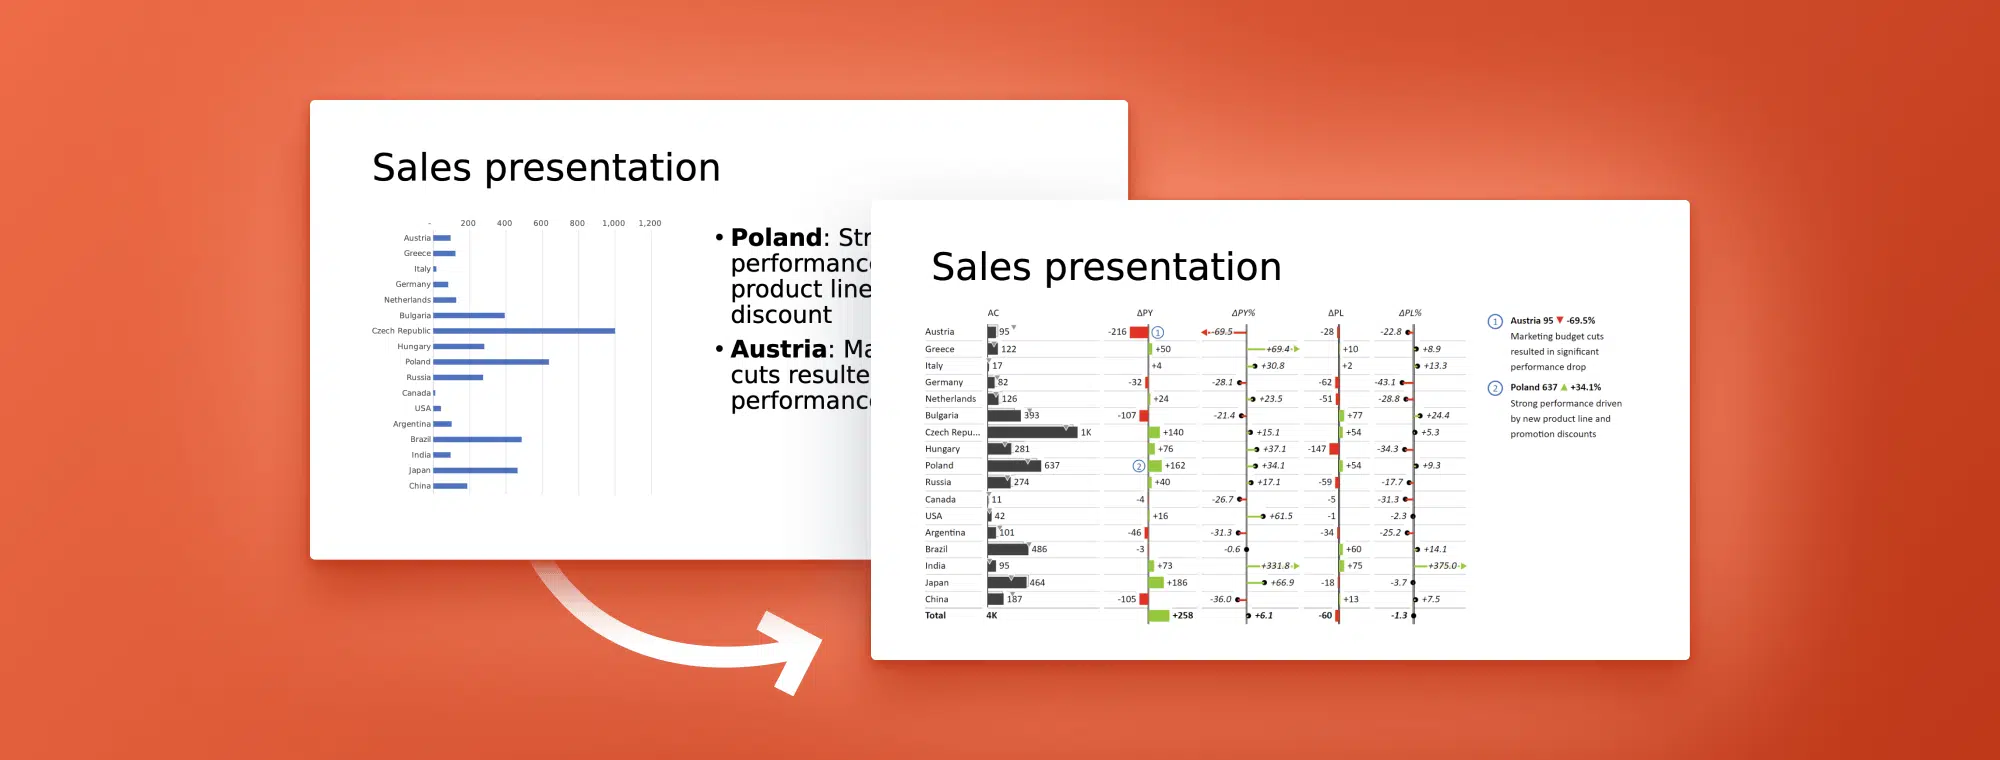 How To Use Powerpoint To Create Compelling Sales Presentations